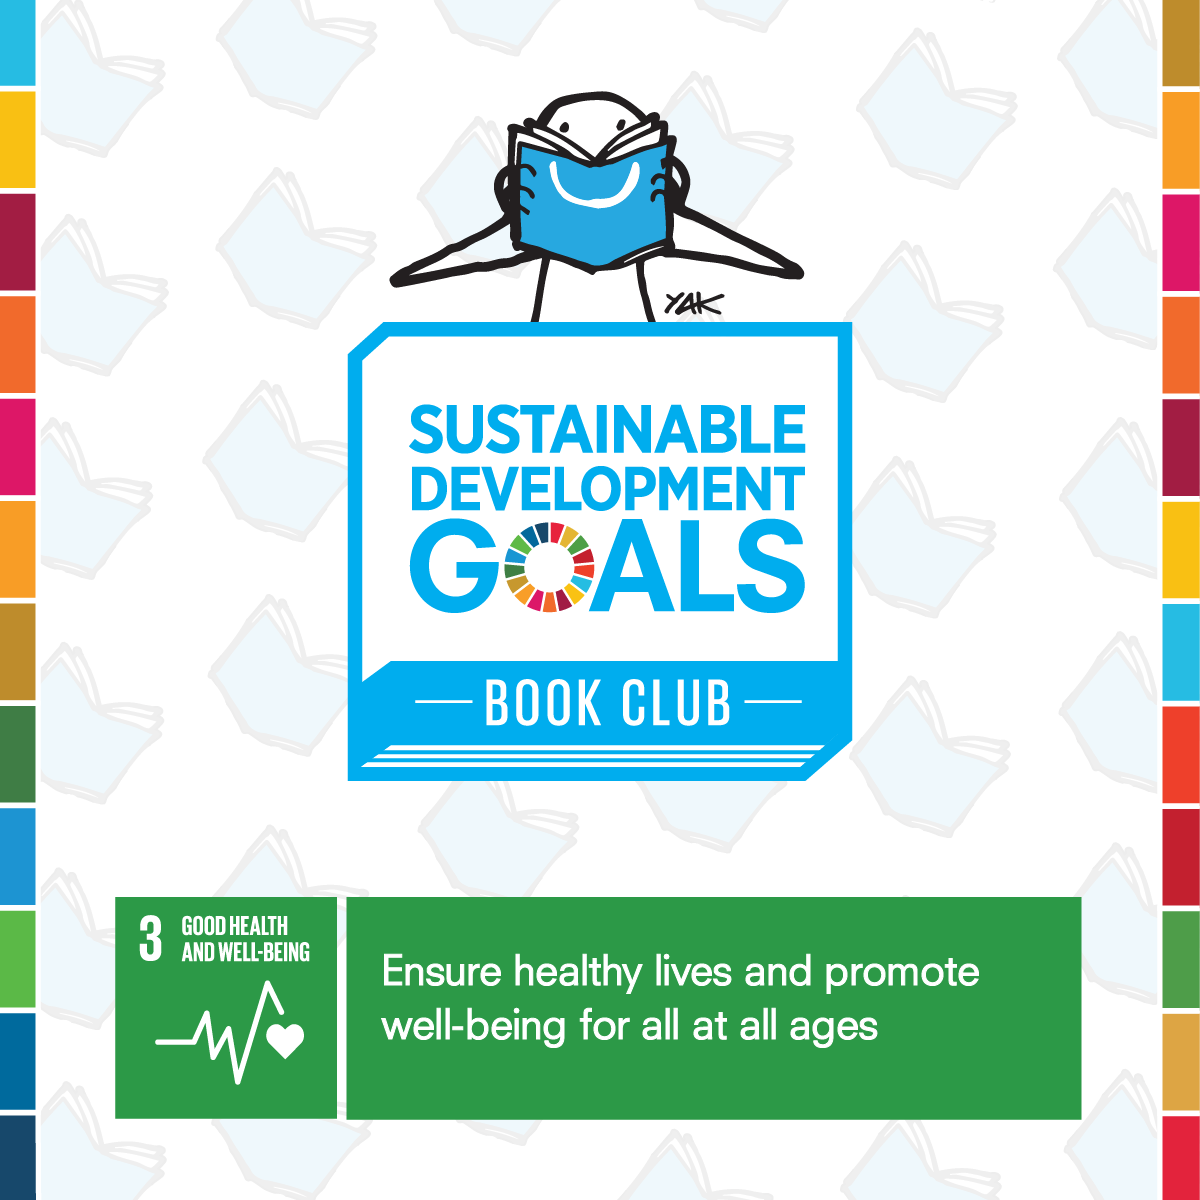 Health and wellbeing Page 152 Sustainable Development Goals photo